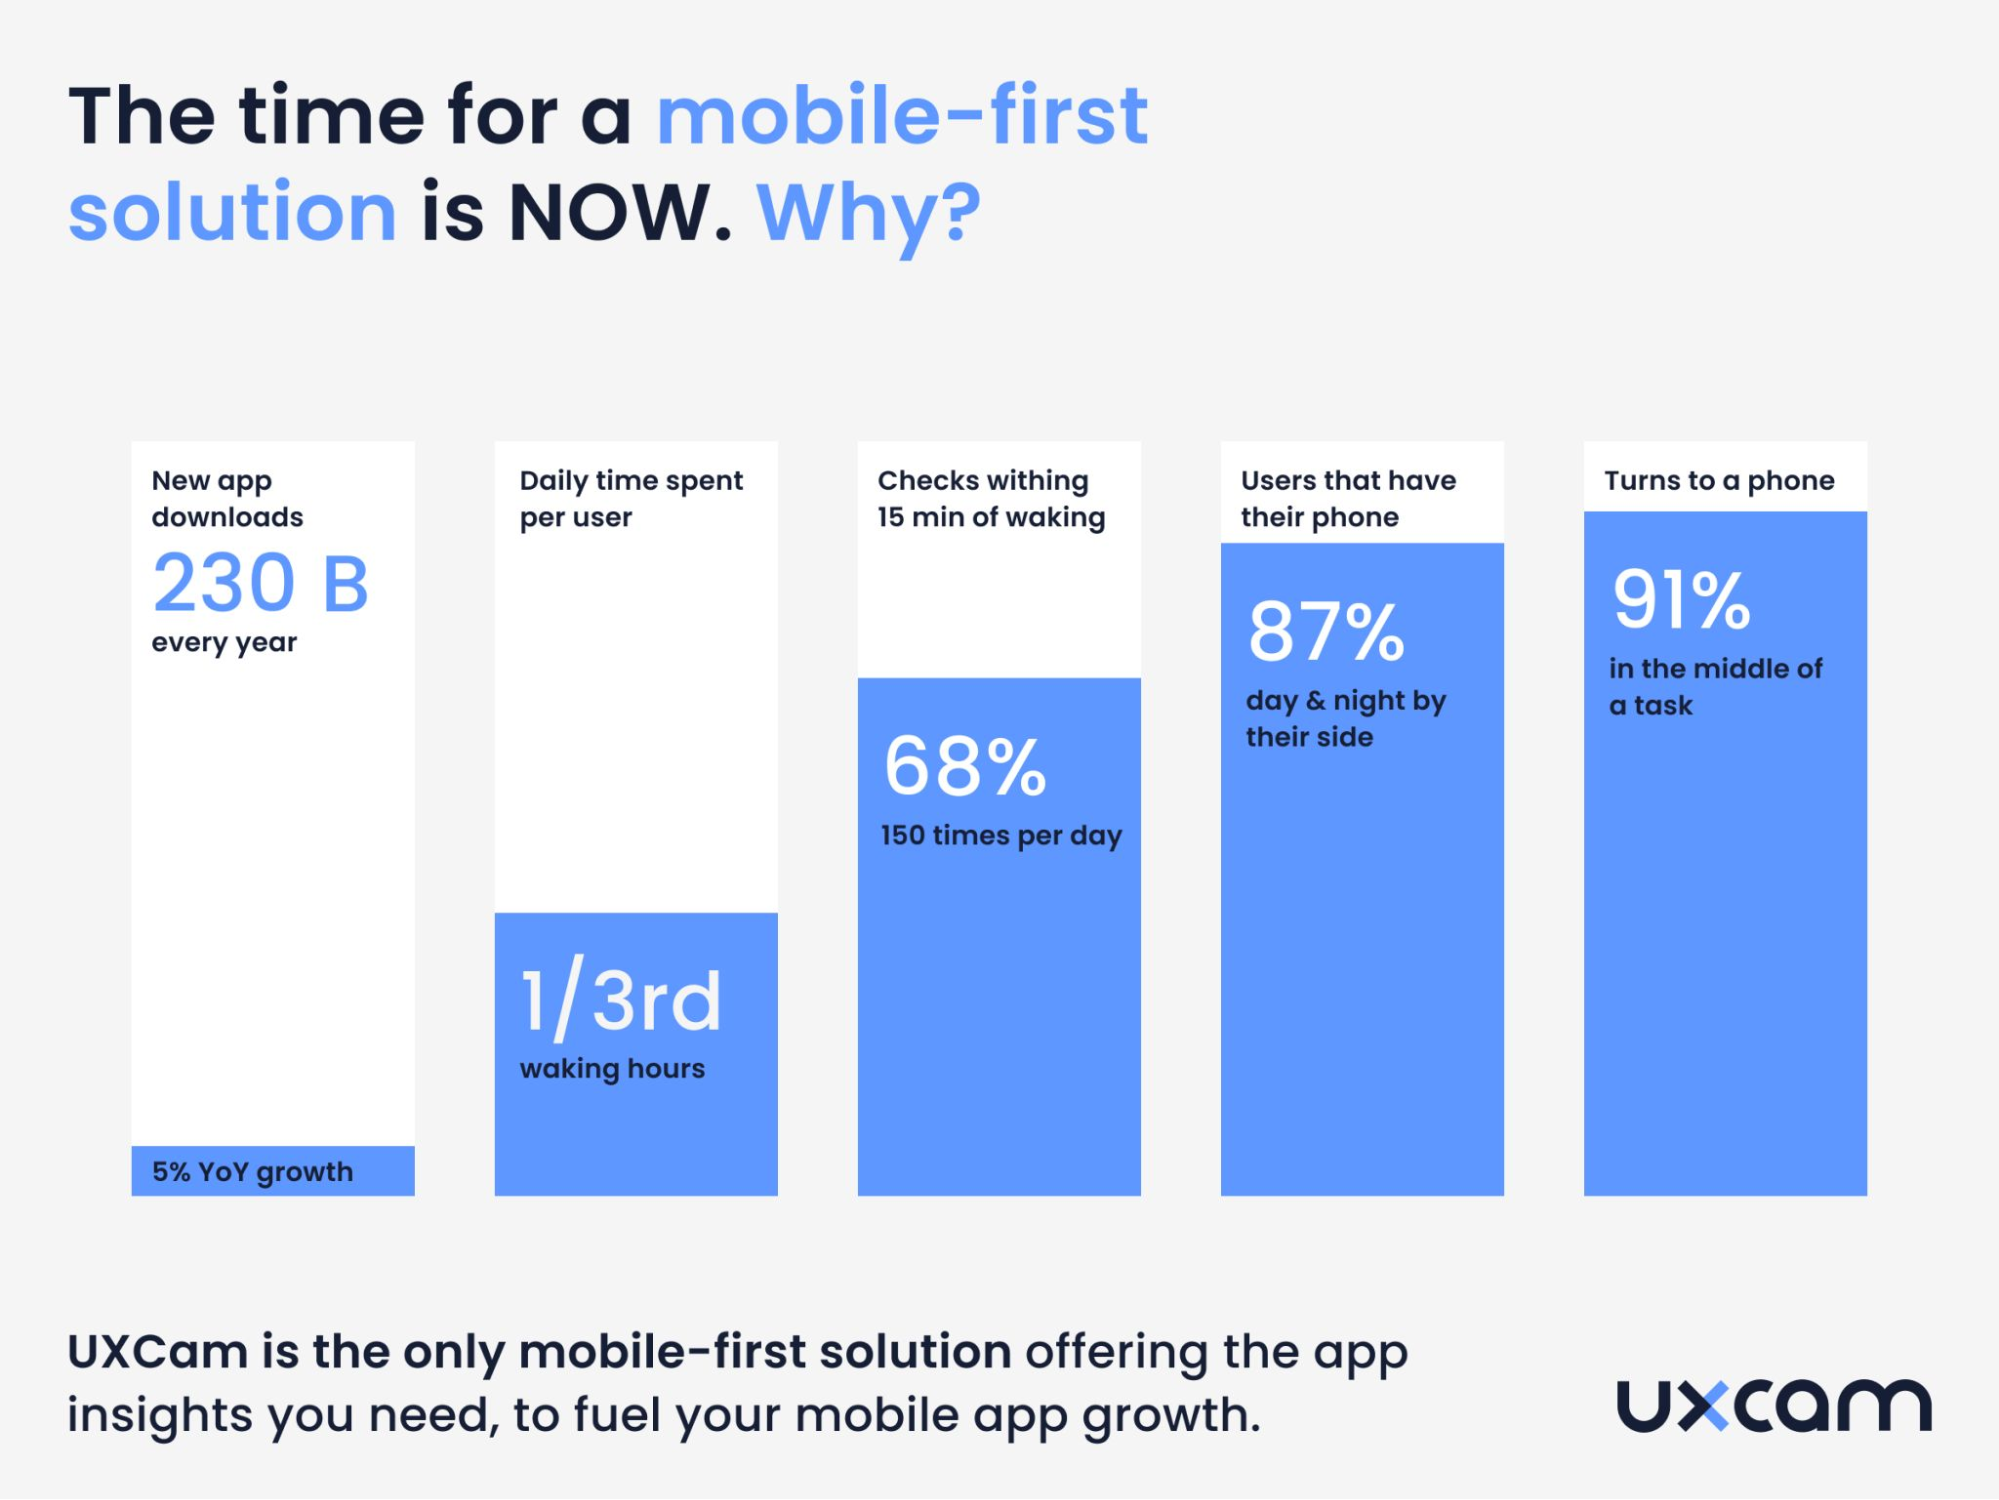 Time is now for a mobile first solution